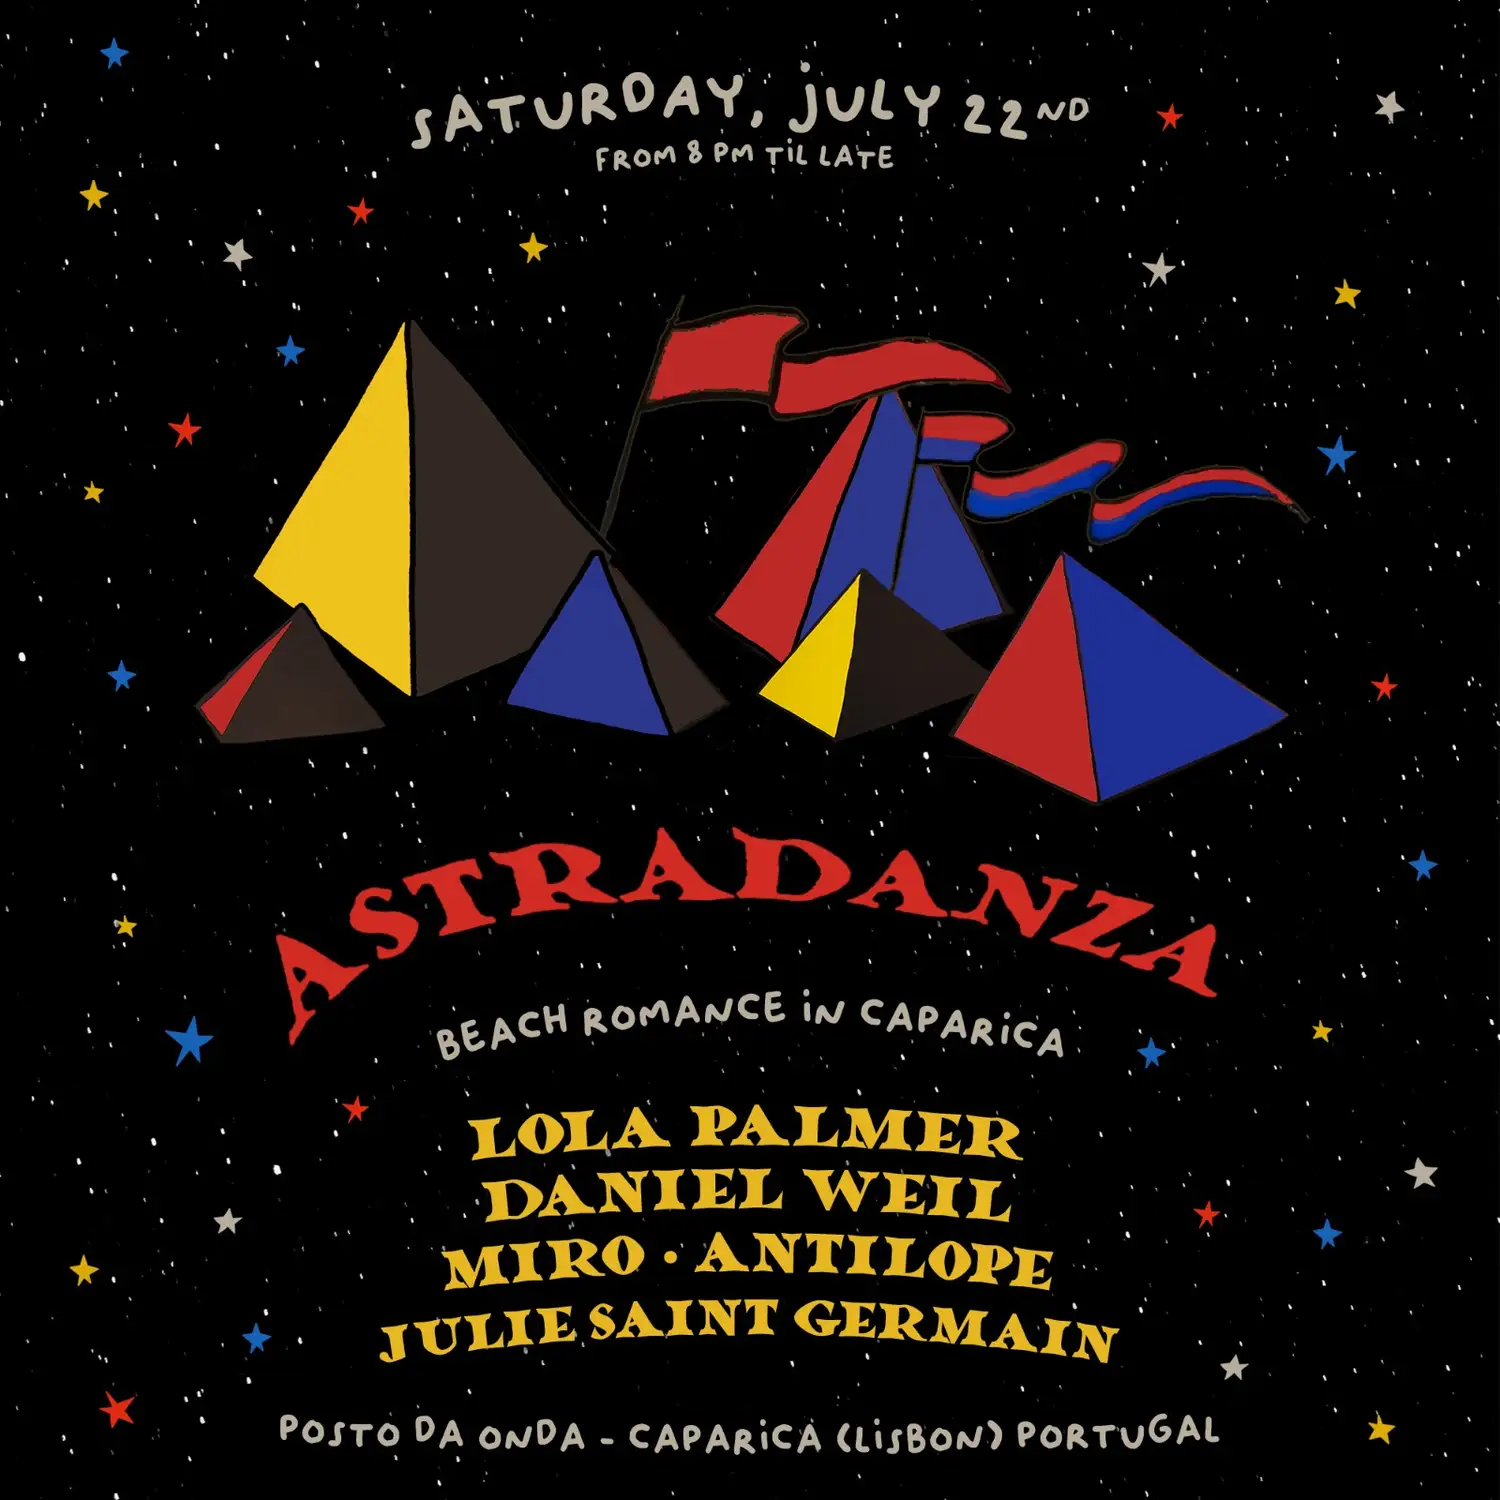 Astradanza on the Beach with Daniel Weil, Lola Palmer & the Wizards